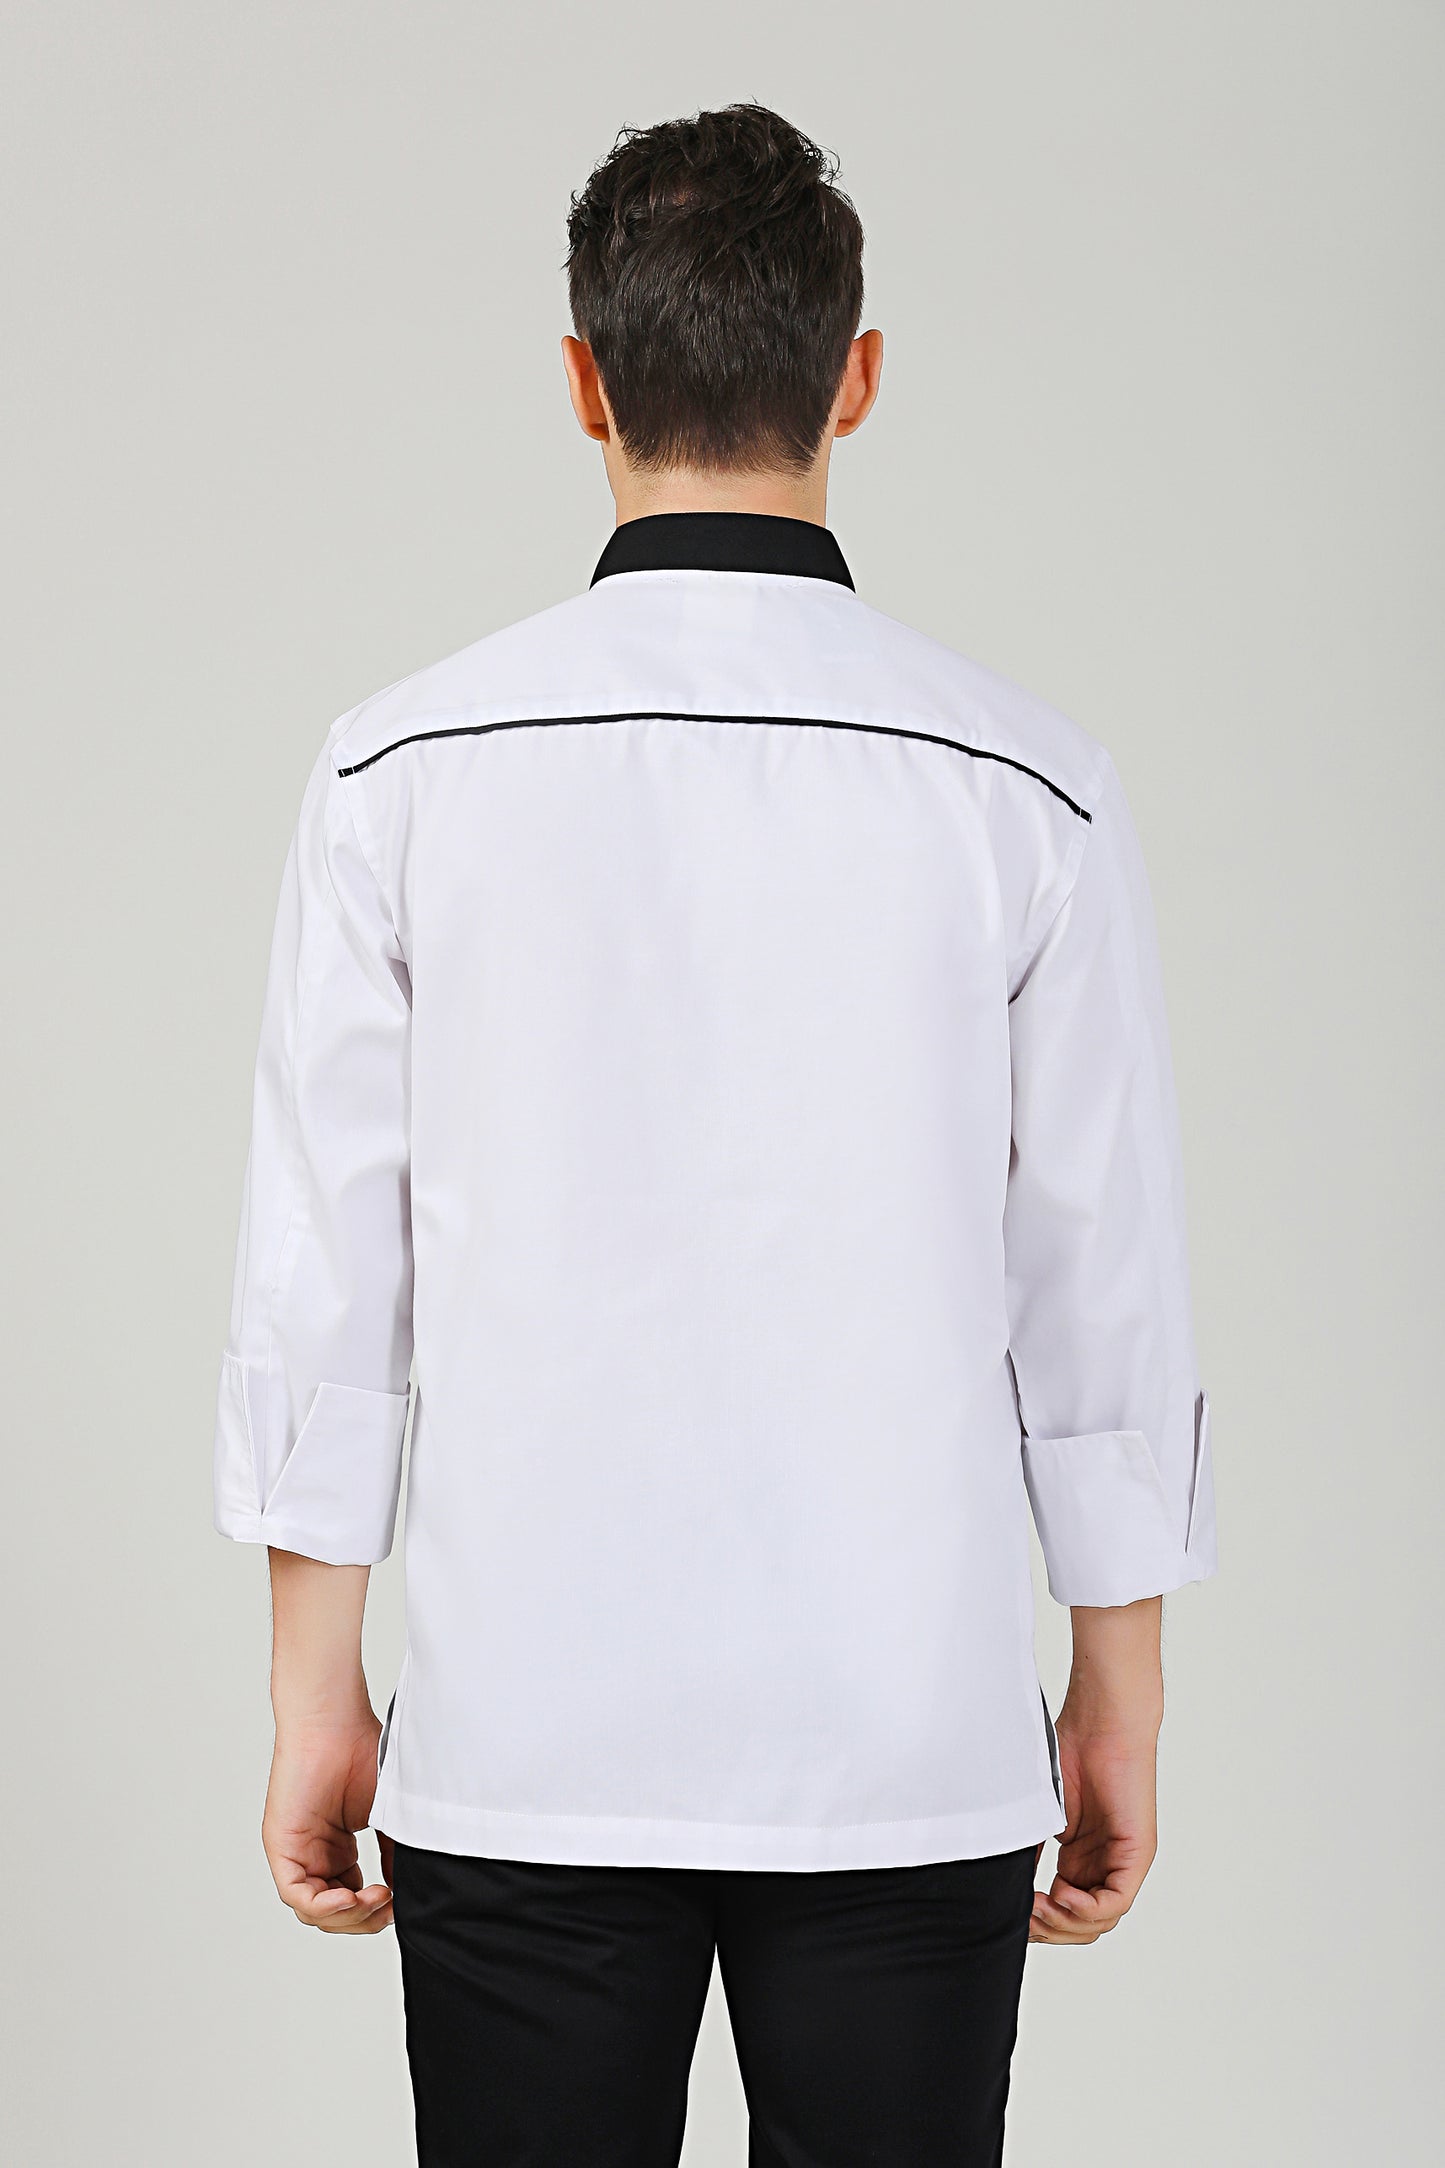 Willow White Chef Jacket, Long Sleeve